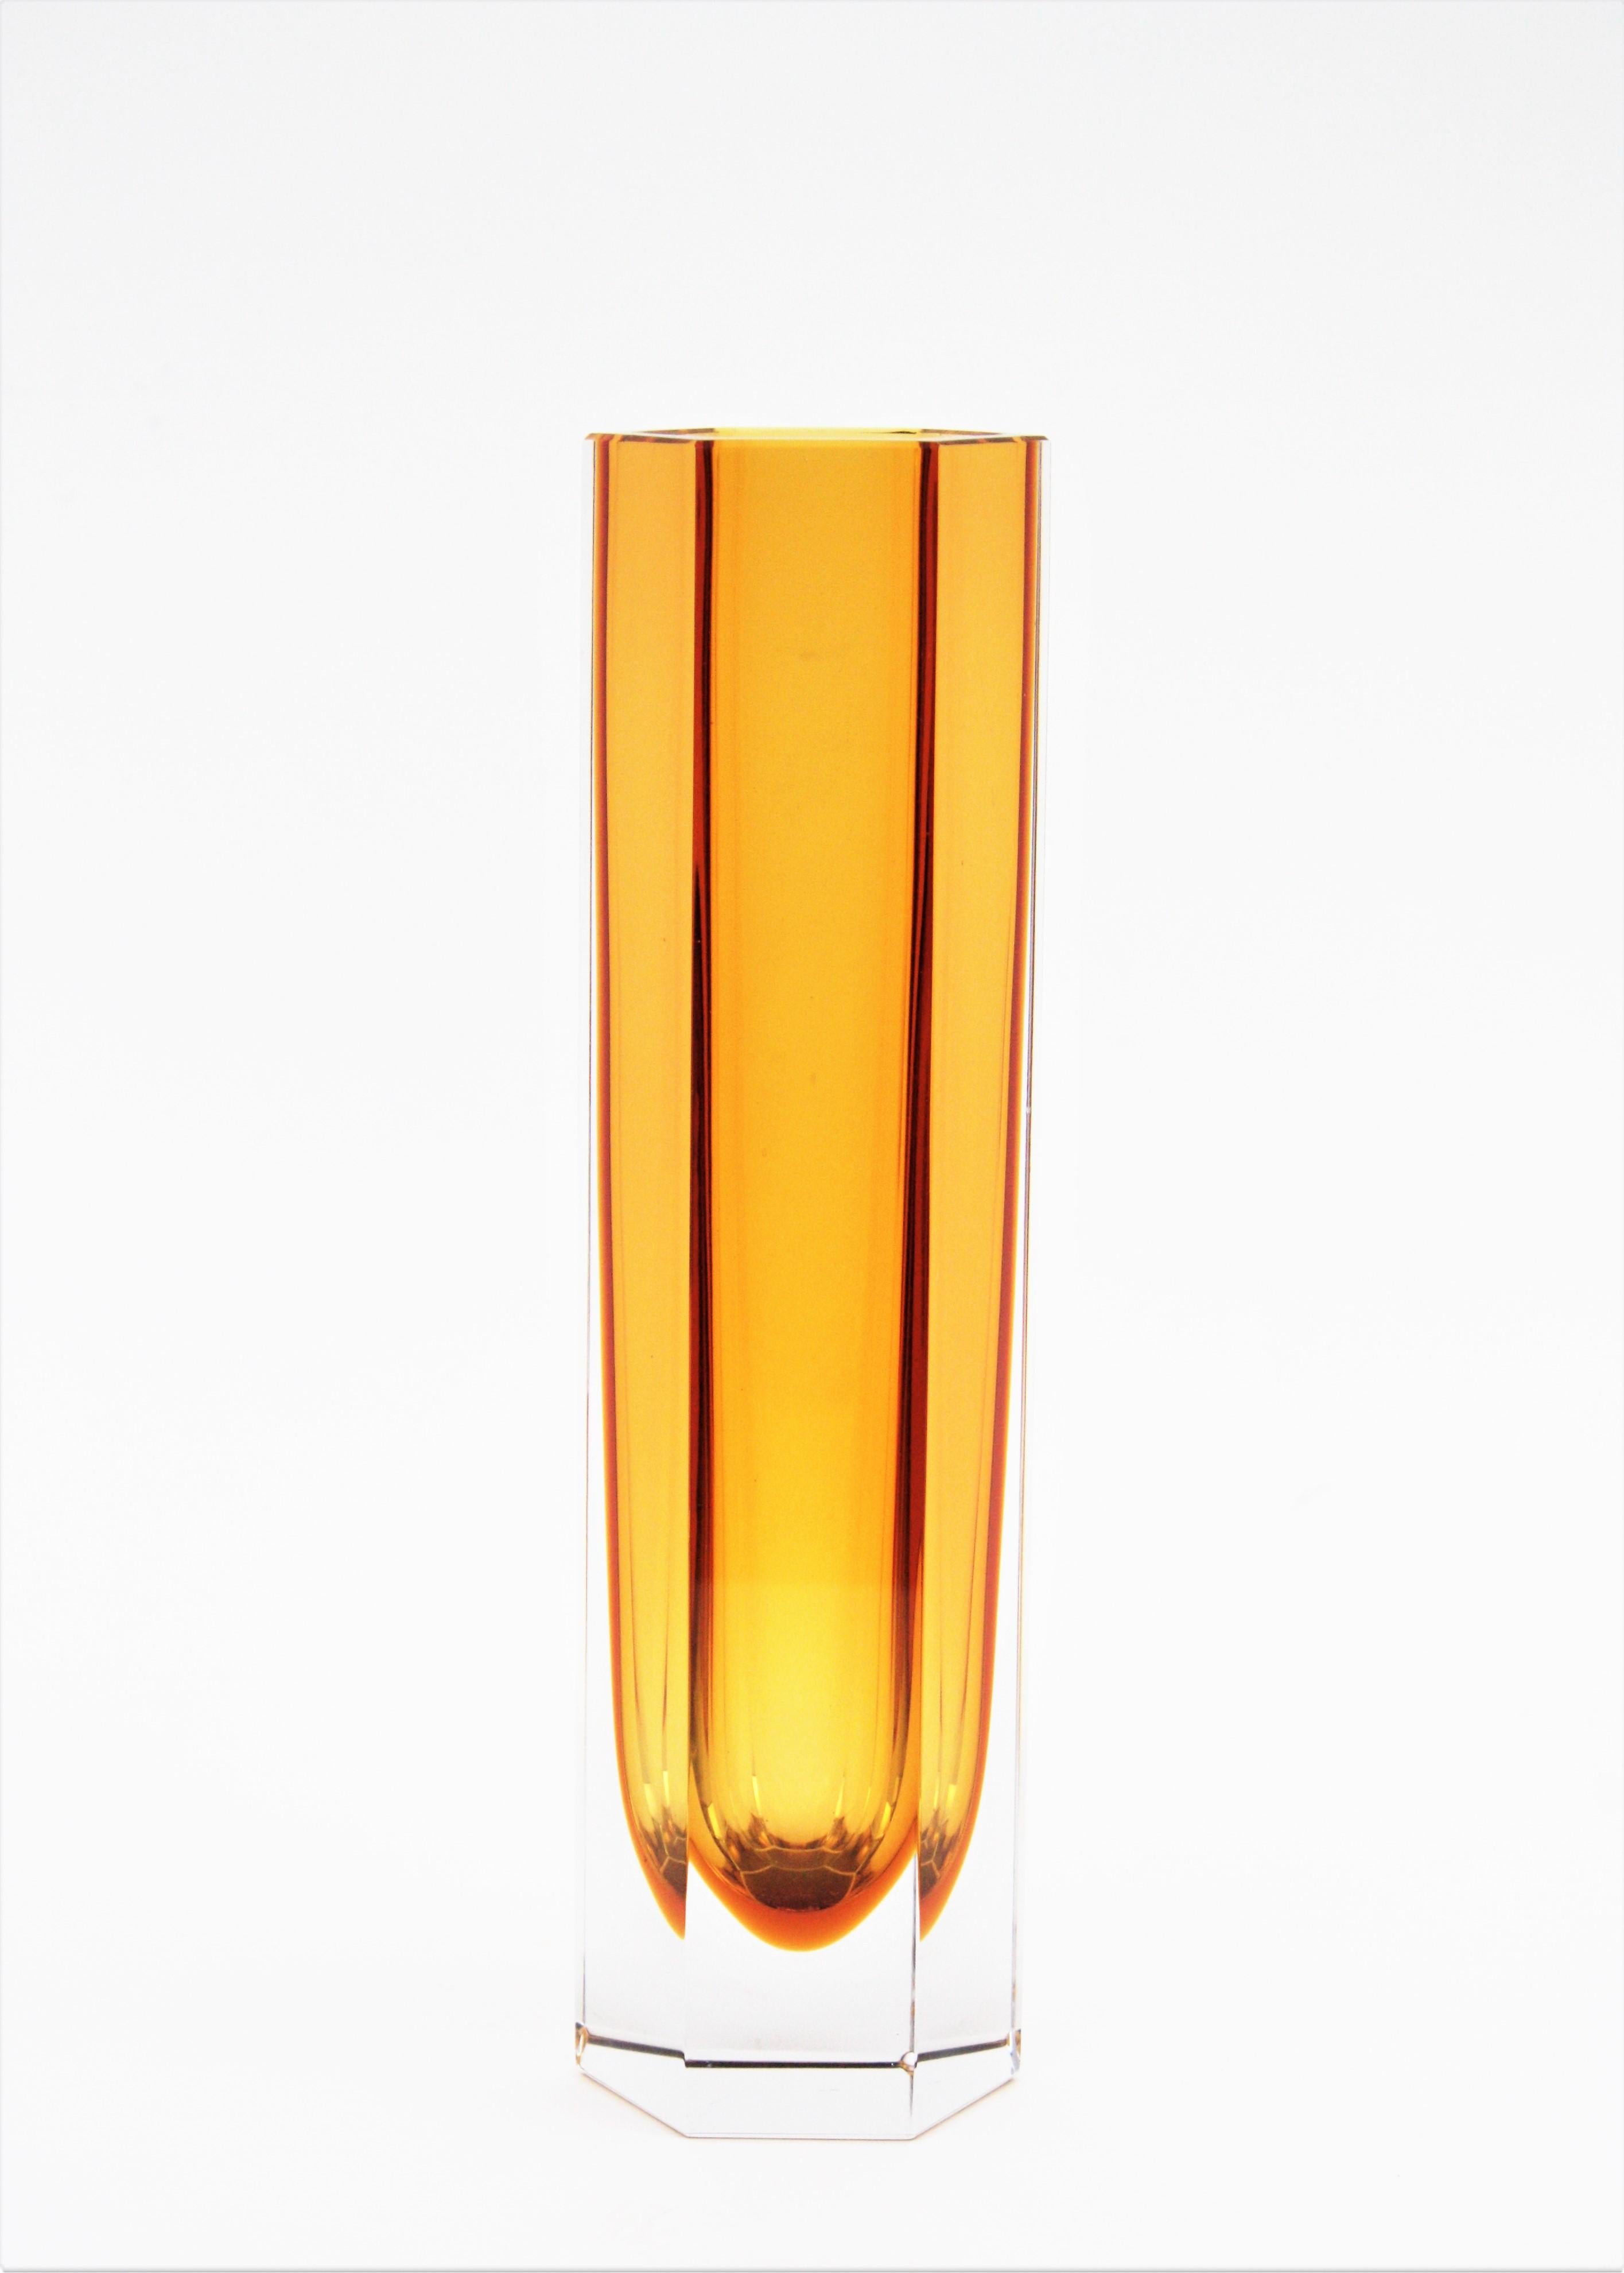 A cool midcentury amber and clear Sommerso glass hexagon faceted vase. Attributed to Mandruzzato, Italy, 1960s.
Amber glass with a layer of orange glass summerged into clear glass.
This eye-catching tall vase in beautiful placed alone but gorgeous